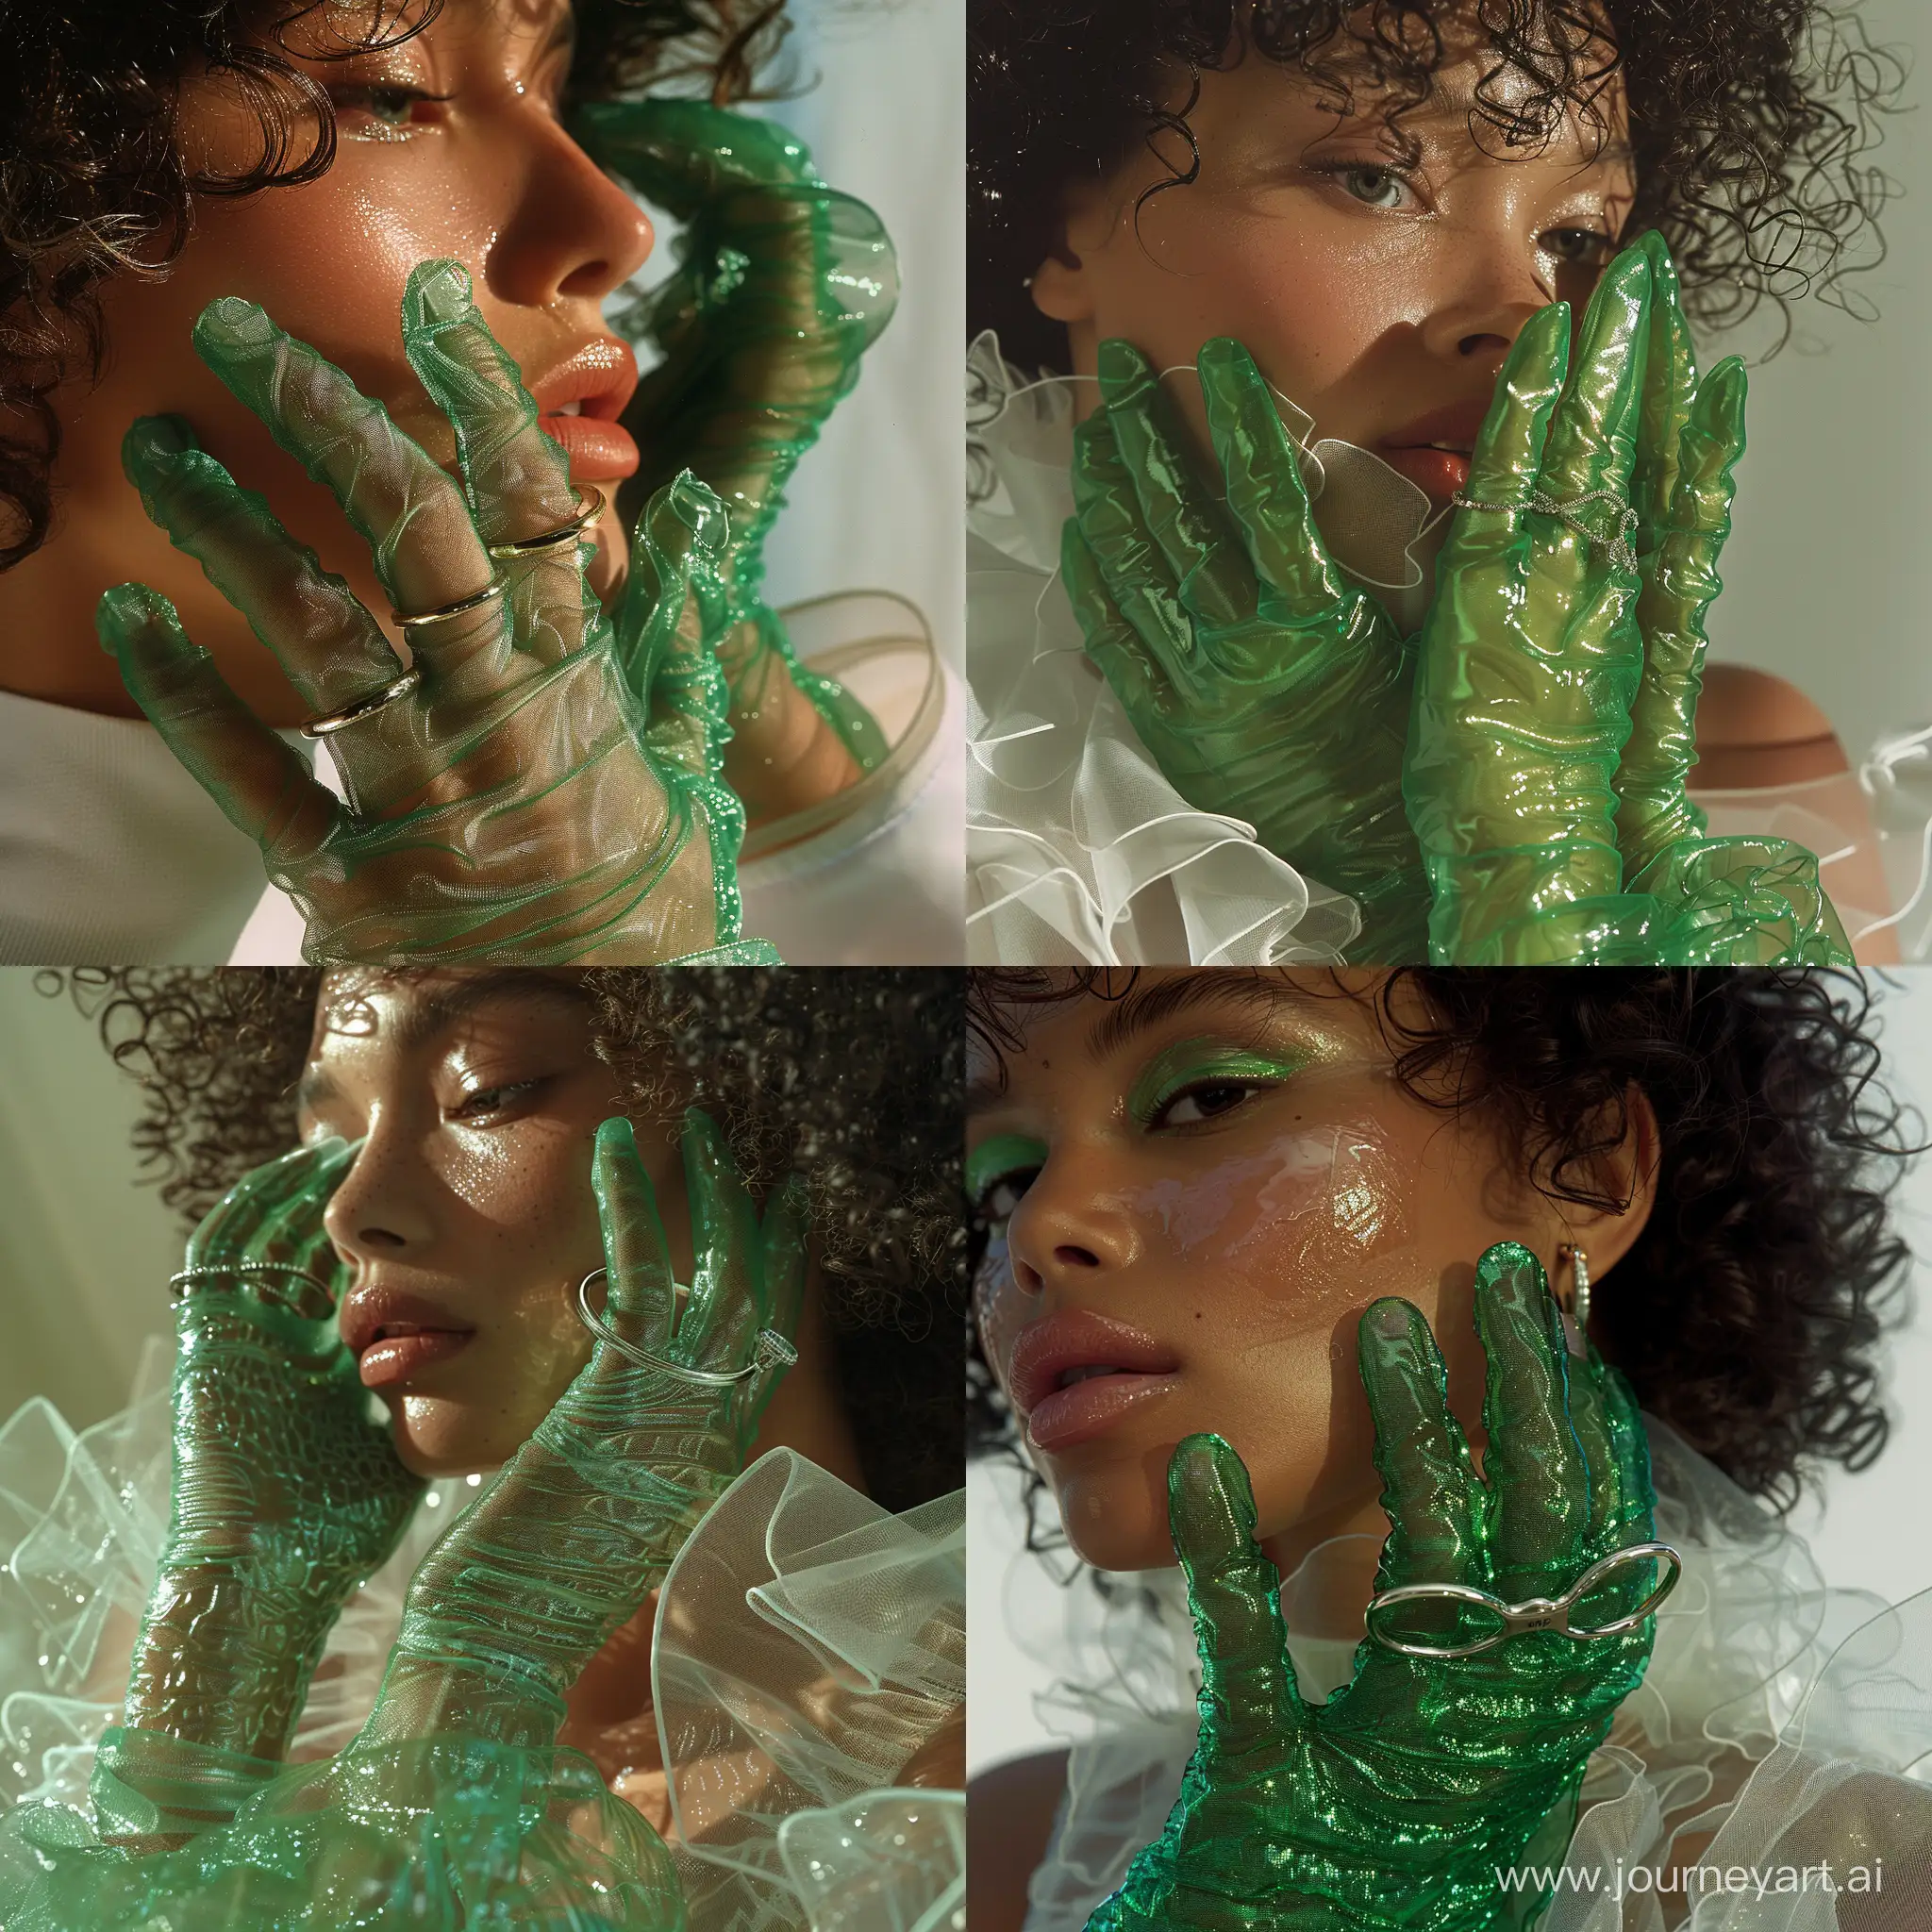 Fashion-Model-with-Green-Organza-Gloves-and-Rings-High-Detail-Portrait-Photography-by-Alessio-Albi